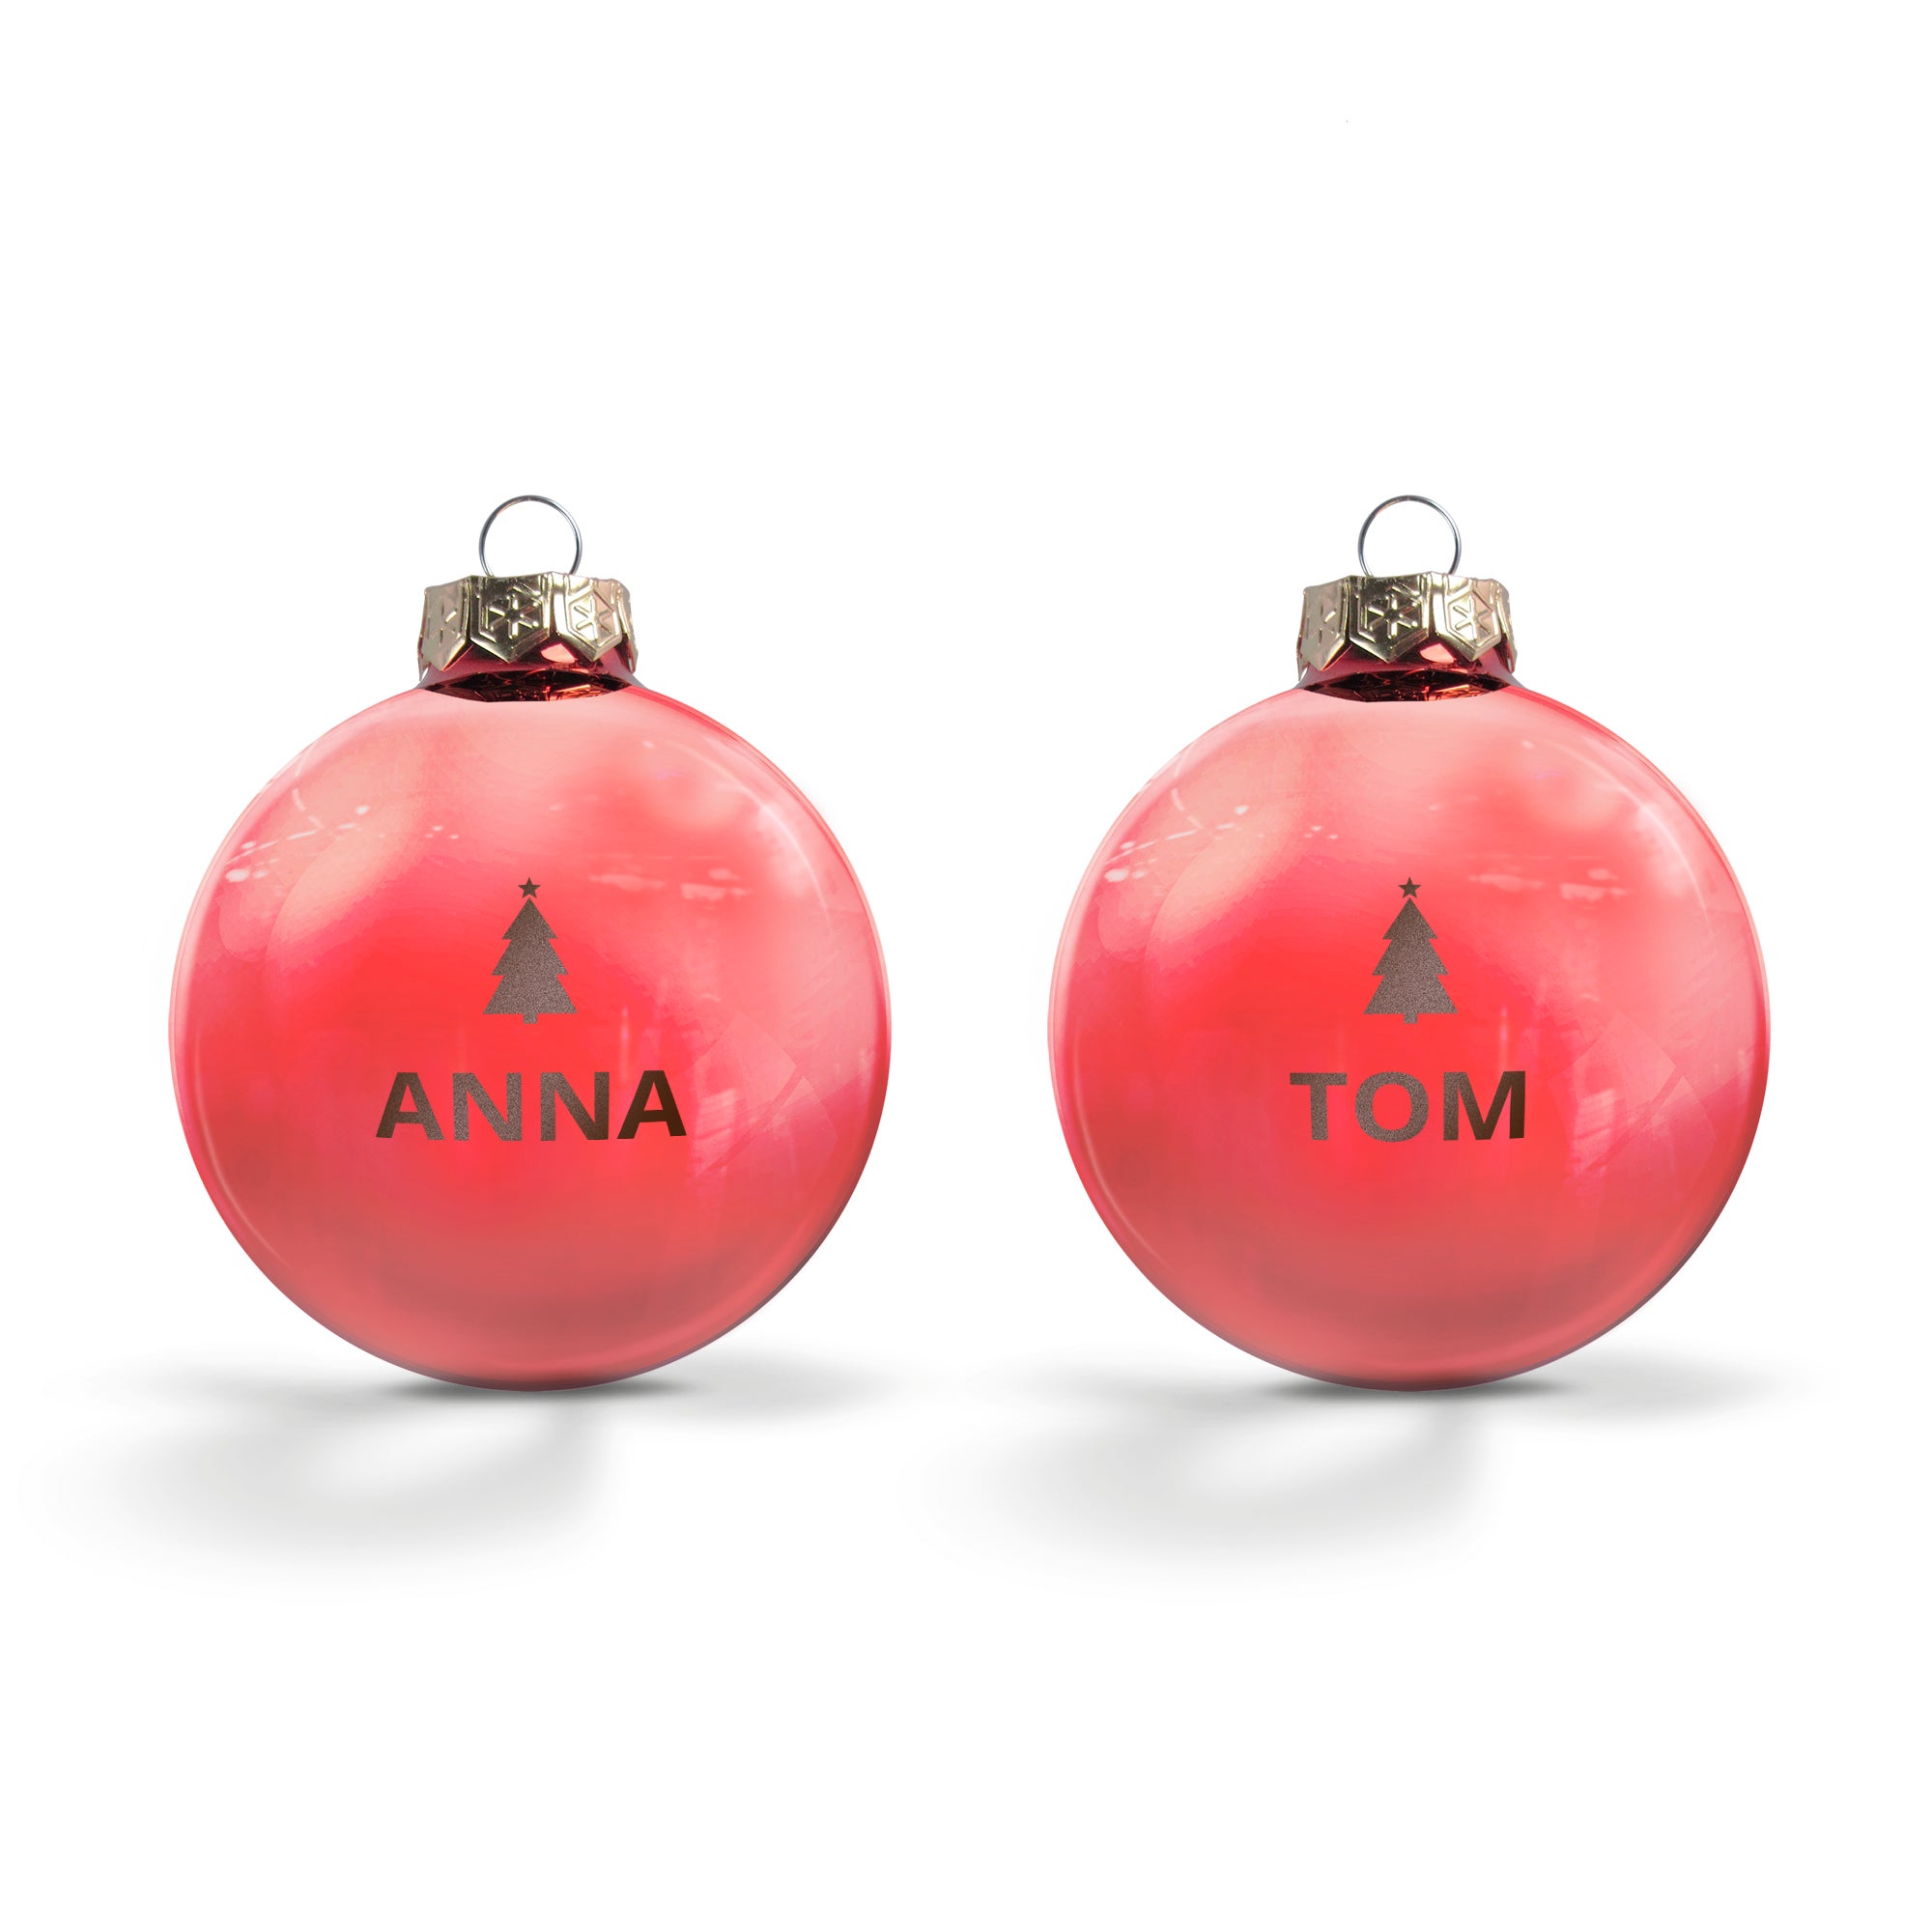 Personalised glass baubles - Red (2 pieces)